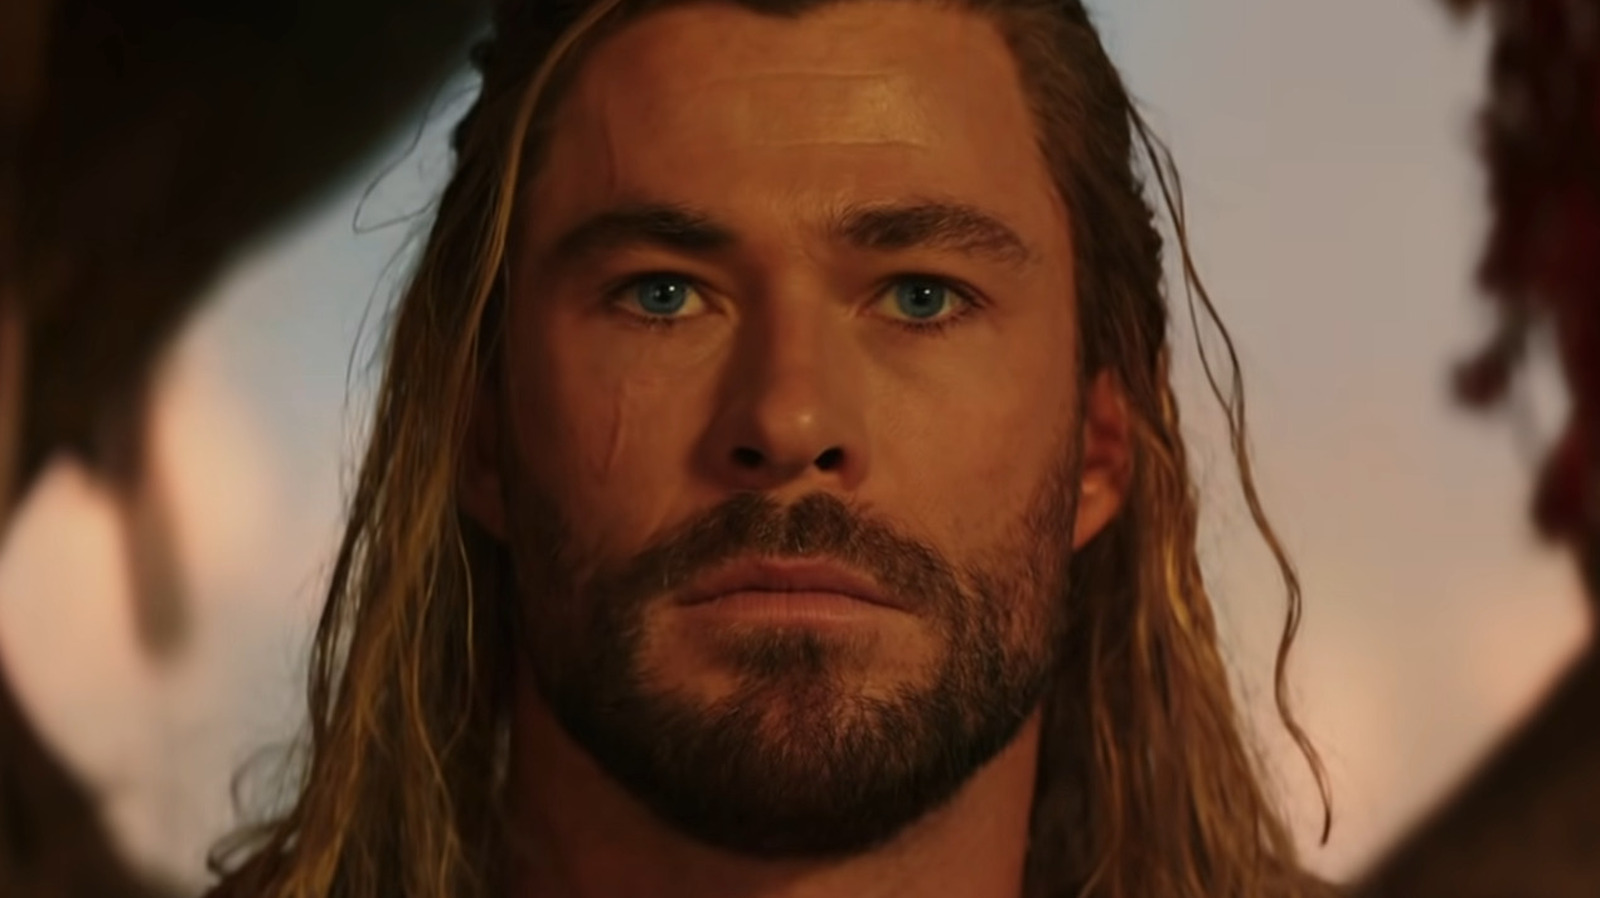 All The Cameos You Might've Missed In 'Thor: Love and Thunder